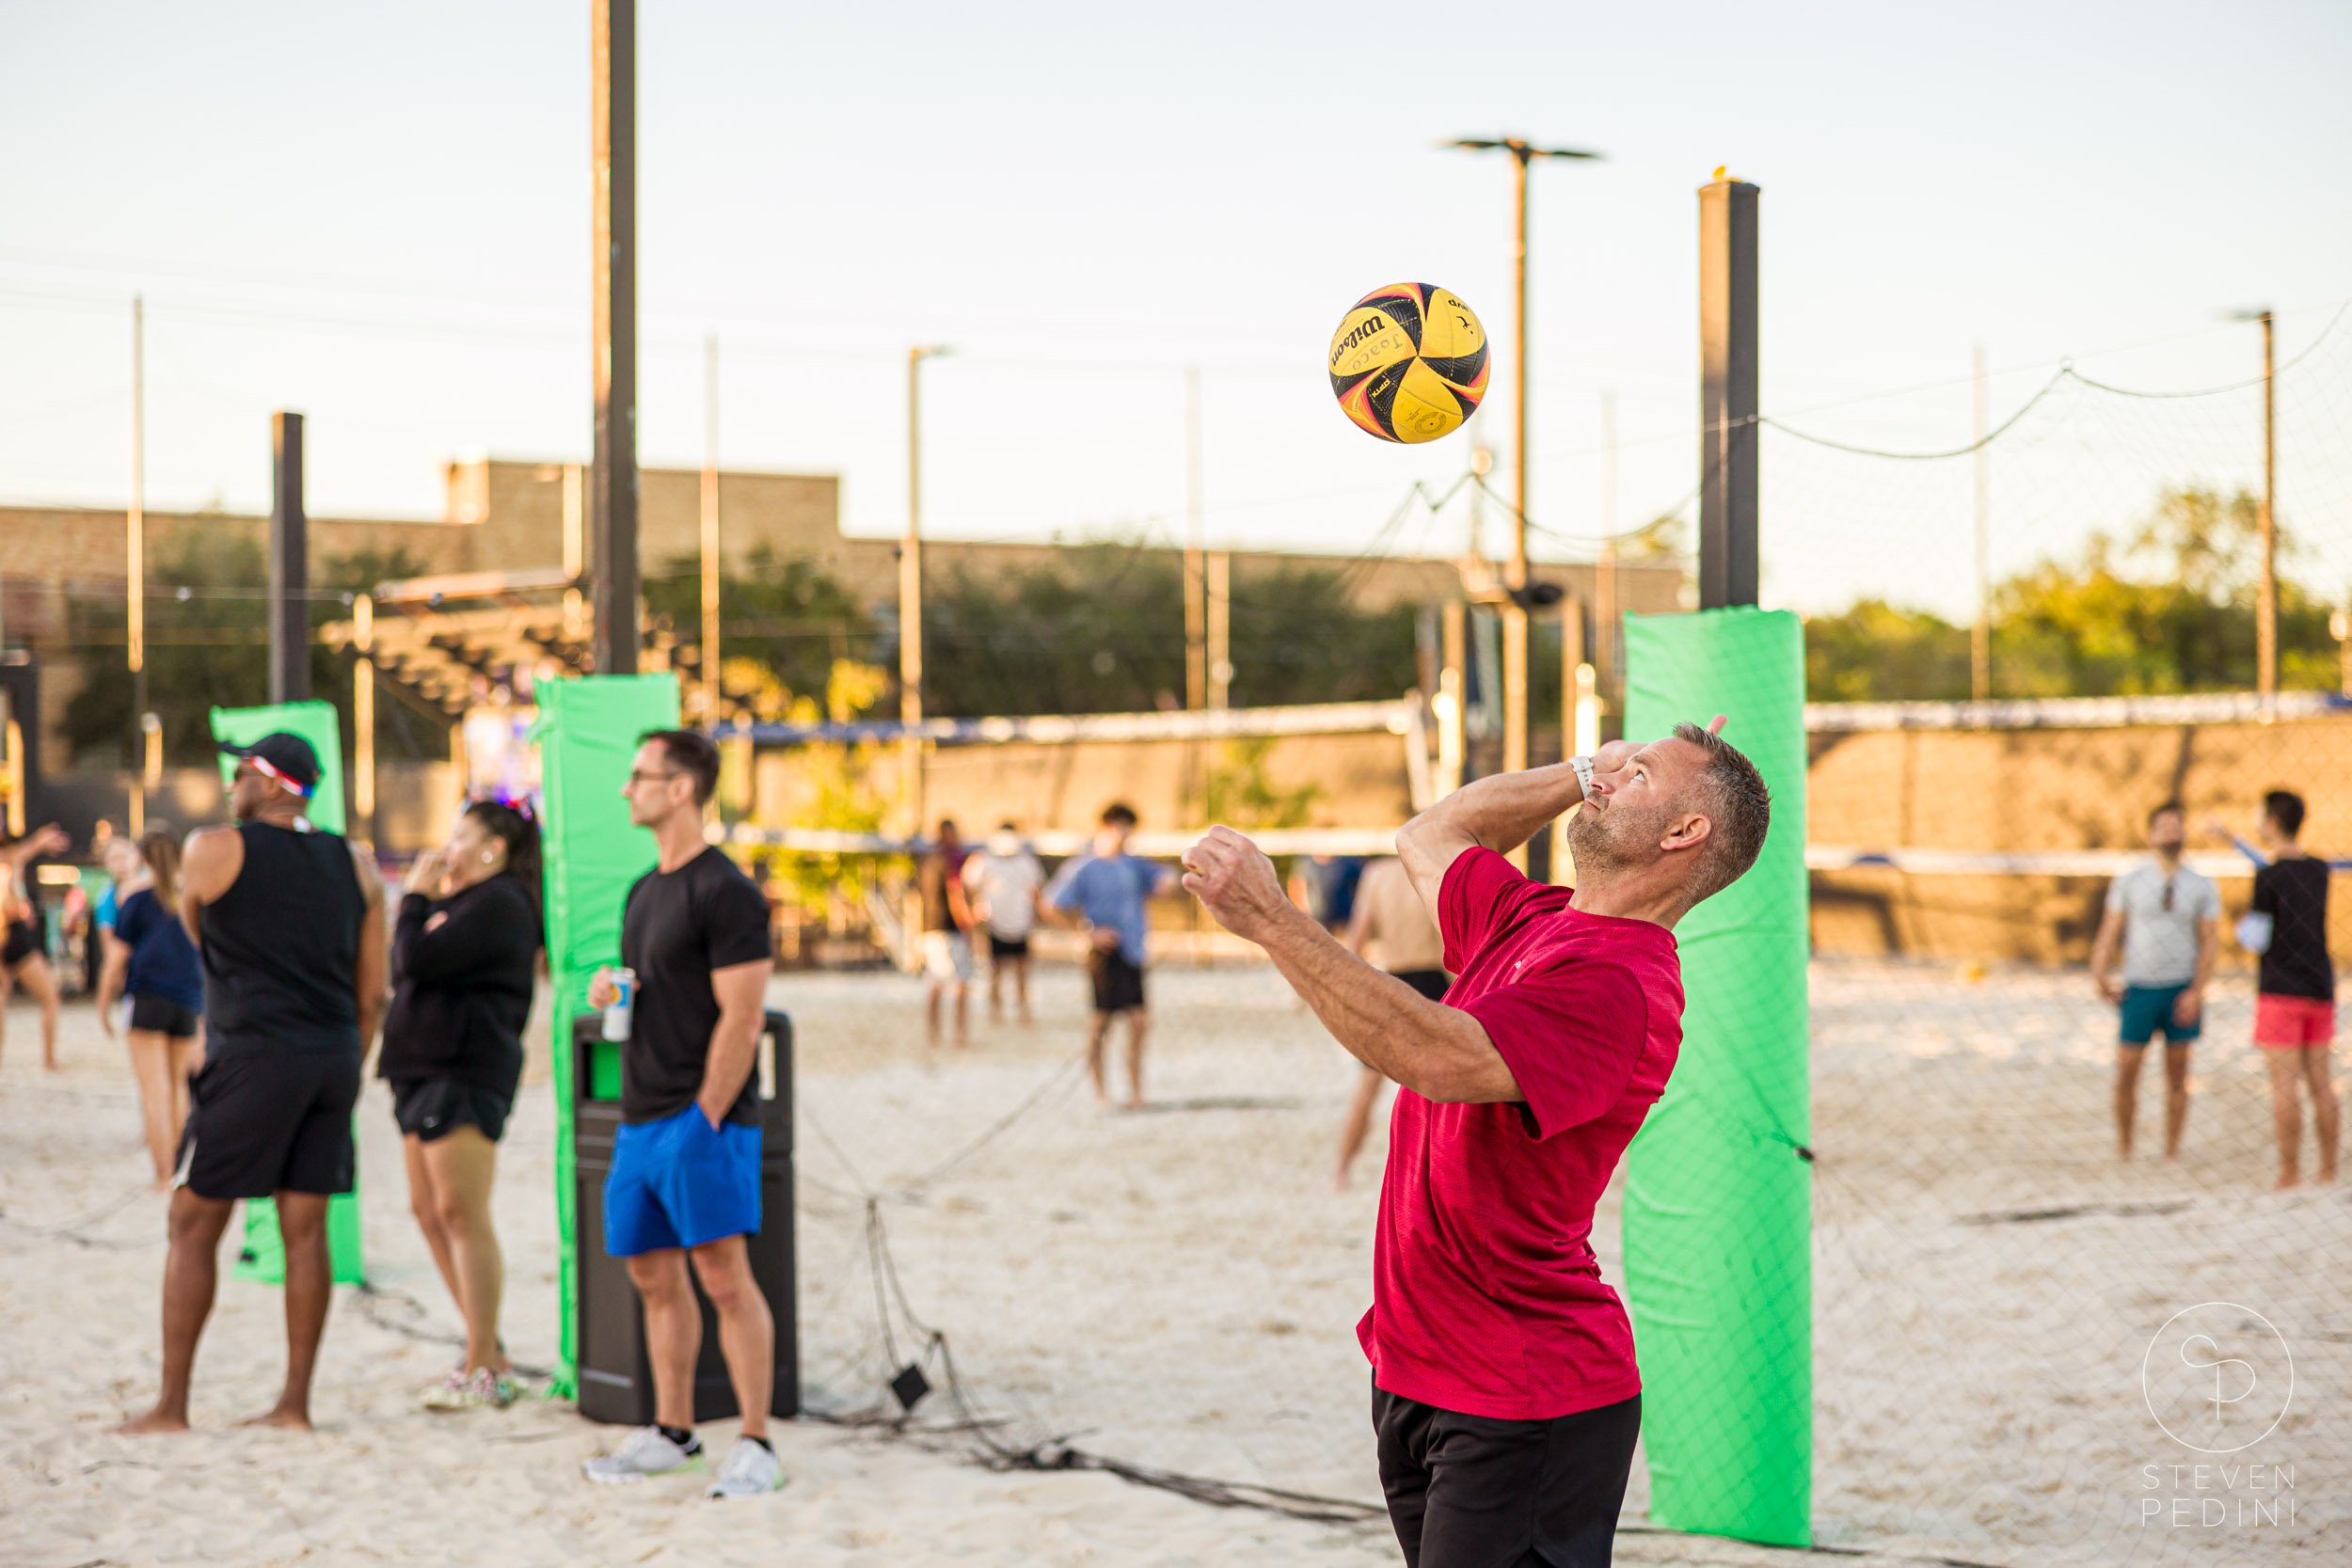 Steven Pedini Photography - Bumpy Pickle - Sand Volleyball - Houston TX - World Cup of Volleyball - 00176.jpg